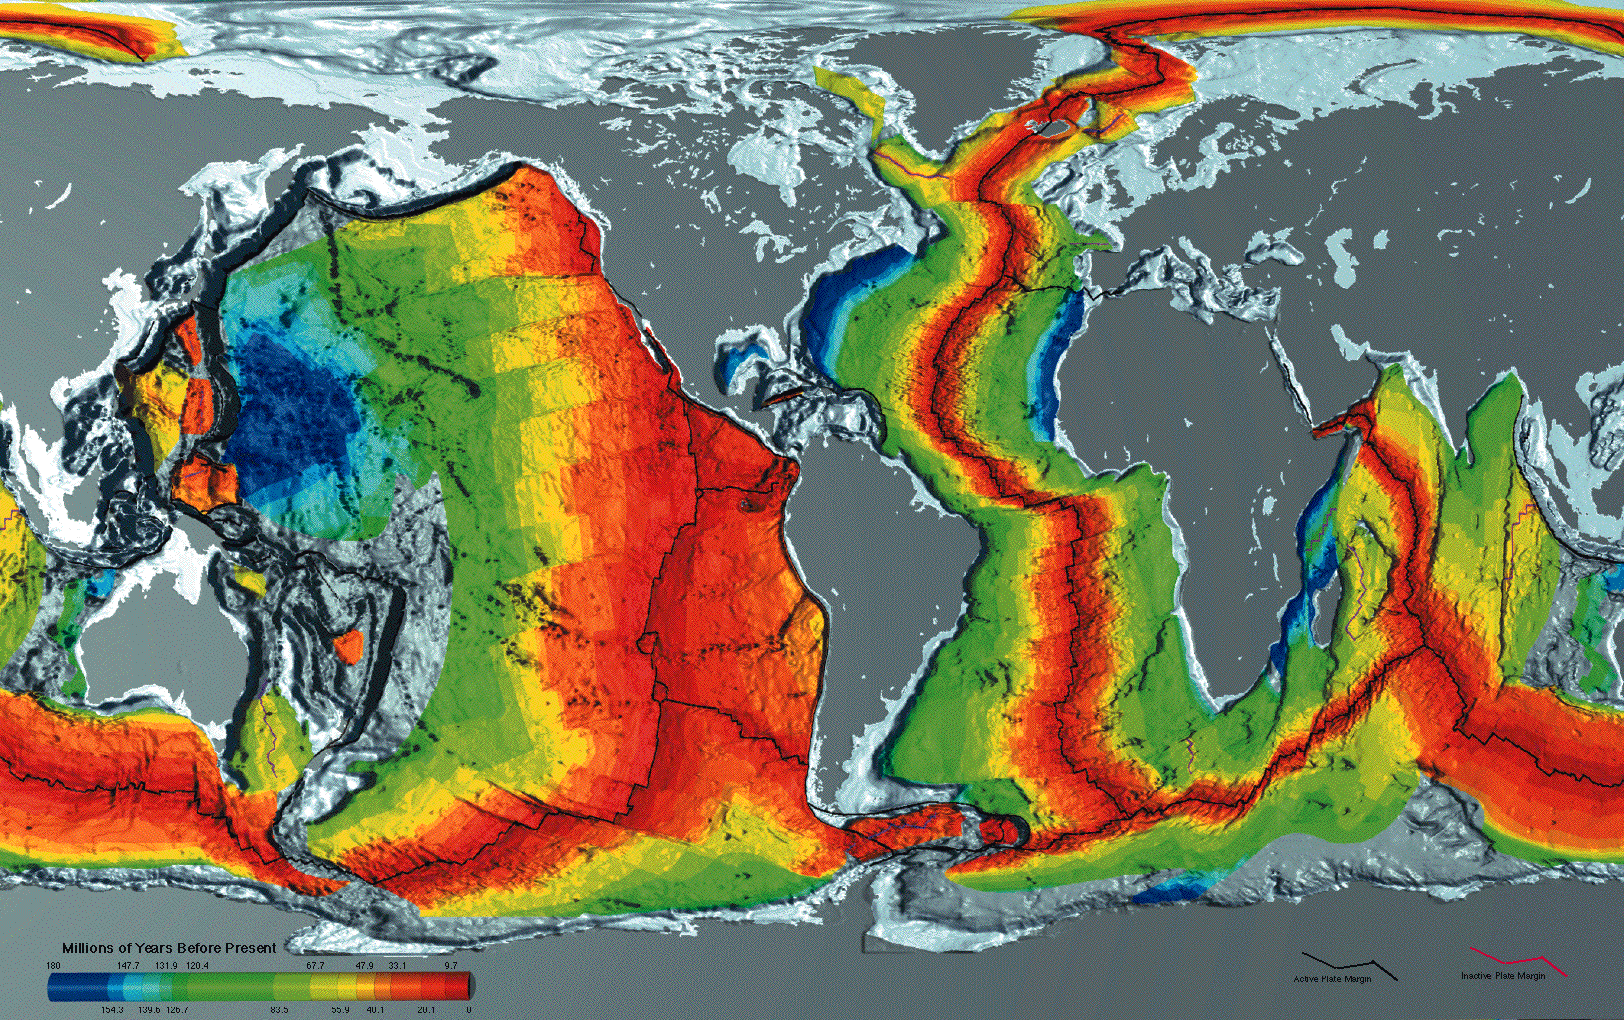 Age of oceanic crust: youngest (red) is along spreading centres, where parts of the mantle rise up to create new crust. Credits: NOAA.